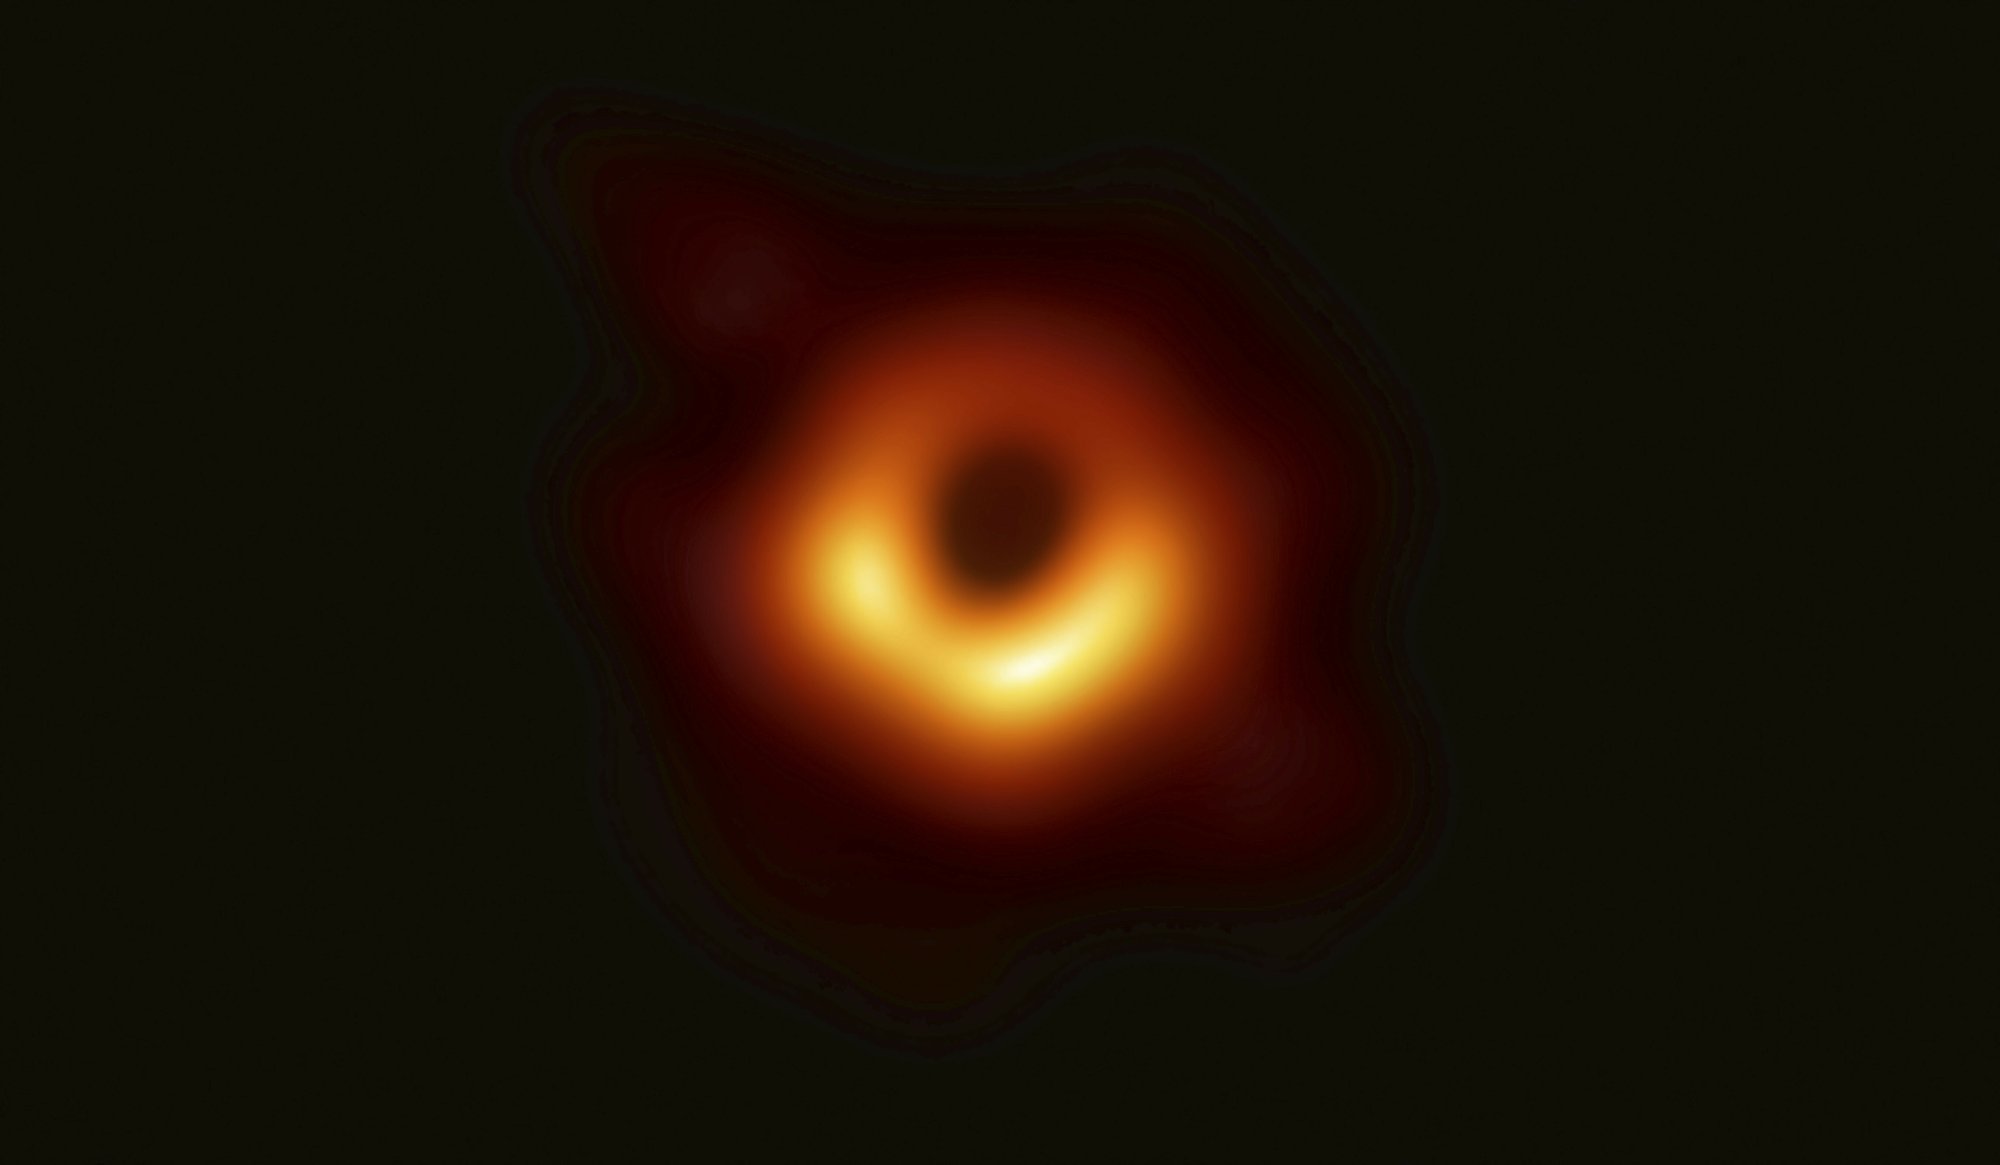 Picture was clear, but black hole’s name a little fuzzy